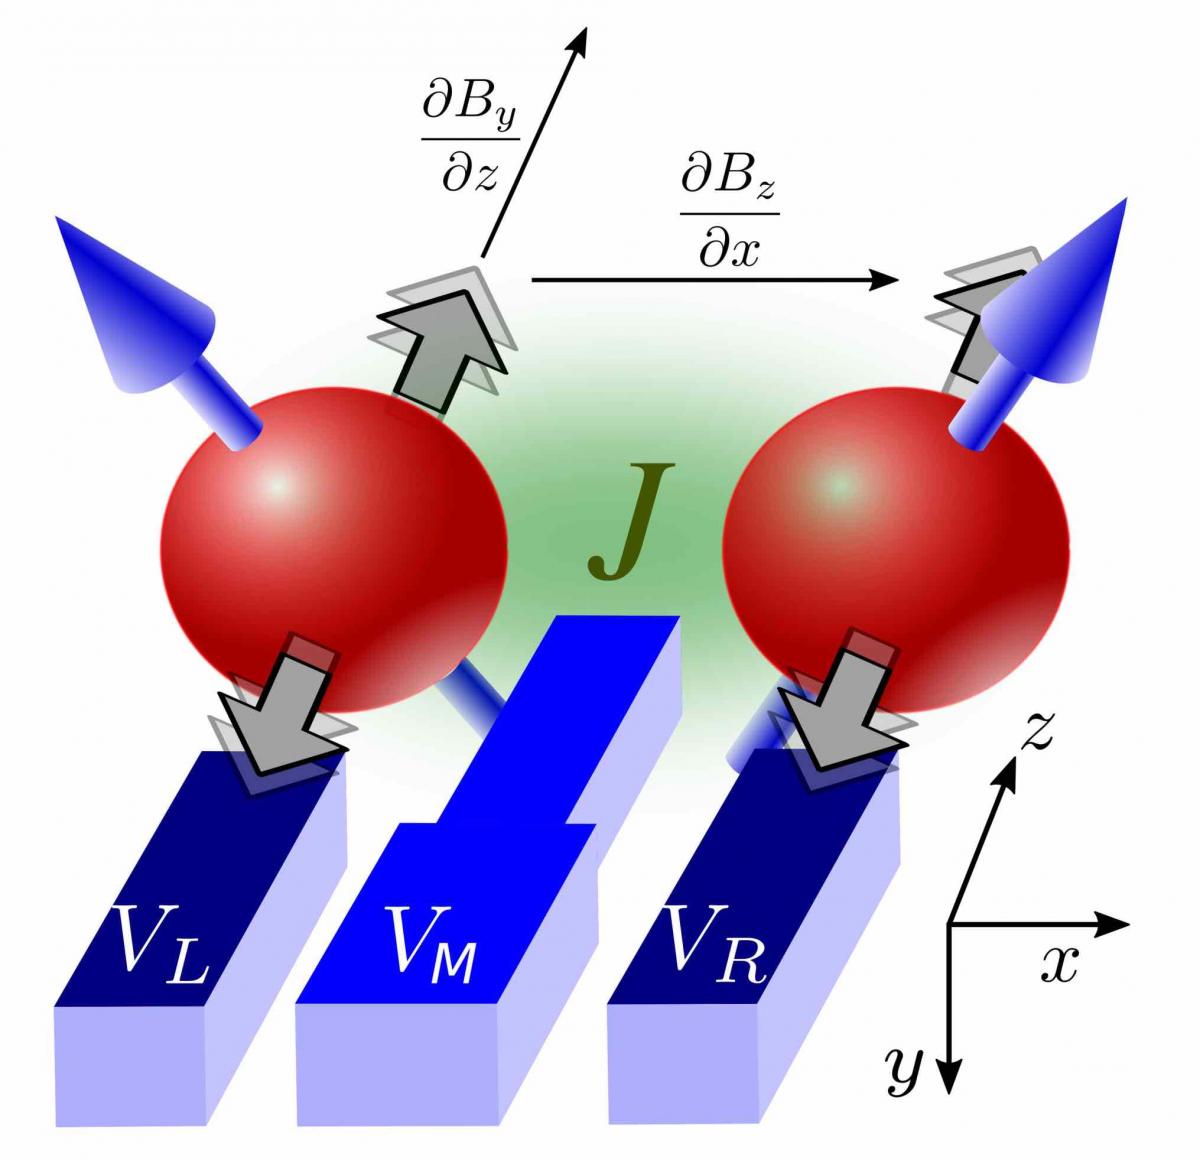 Schematic drawing of two quantum dots with one electron filling each quantum dot. The electron spins are controlled using a static inhomogeneous magneitc field in combination with oscillating magnetic fields.